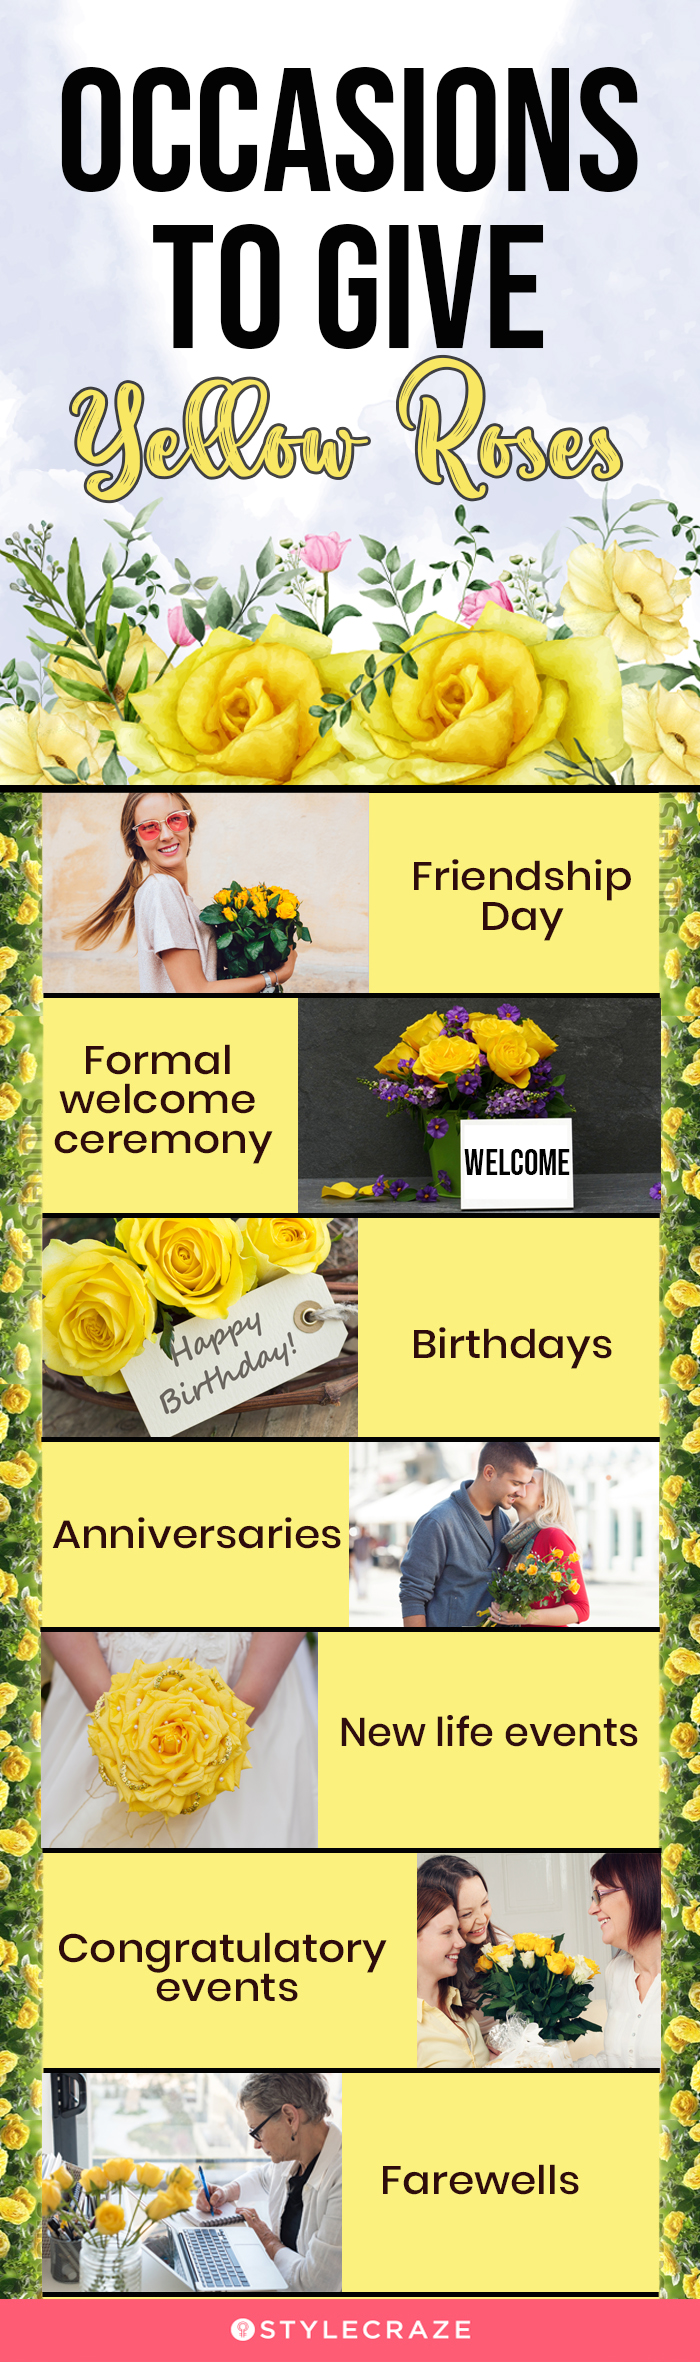 occasions to give yellow roses (infographic)